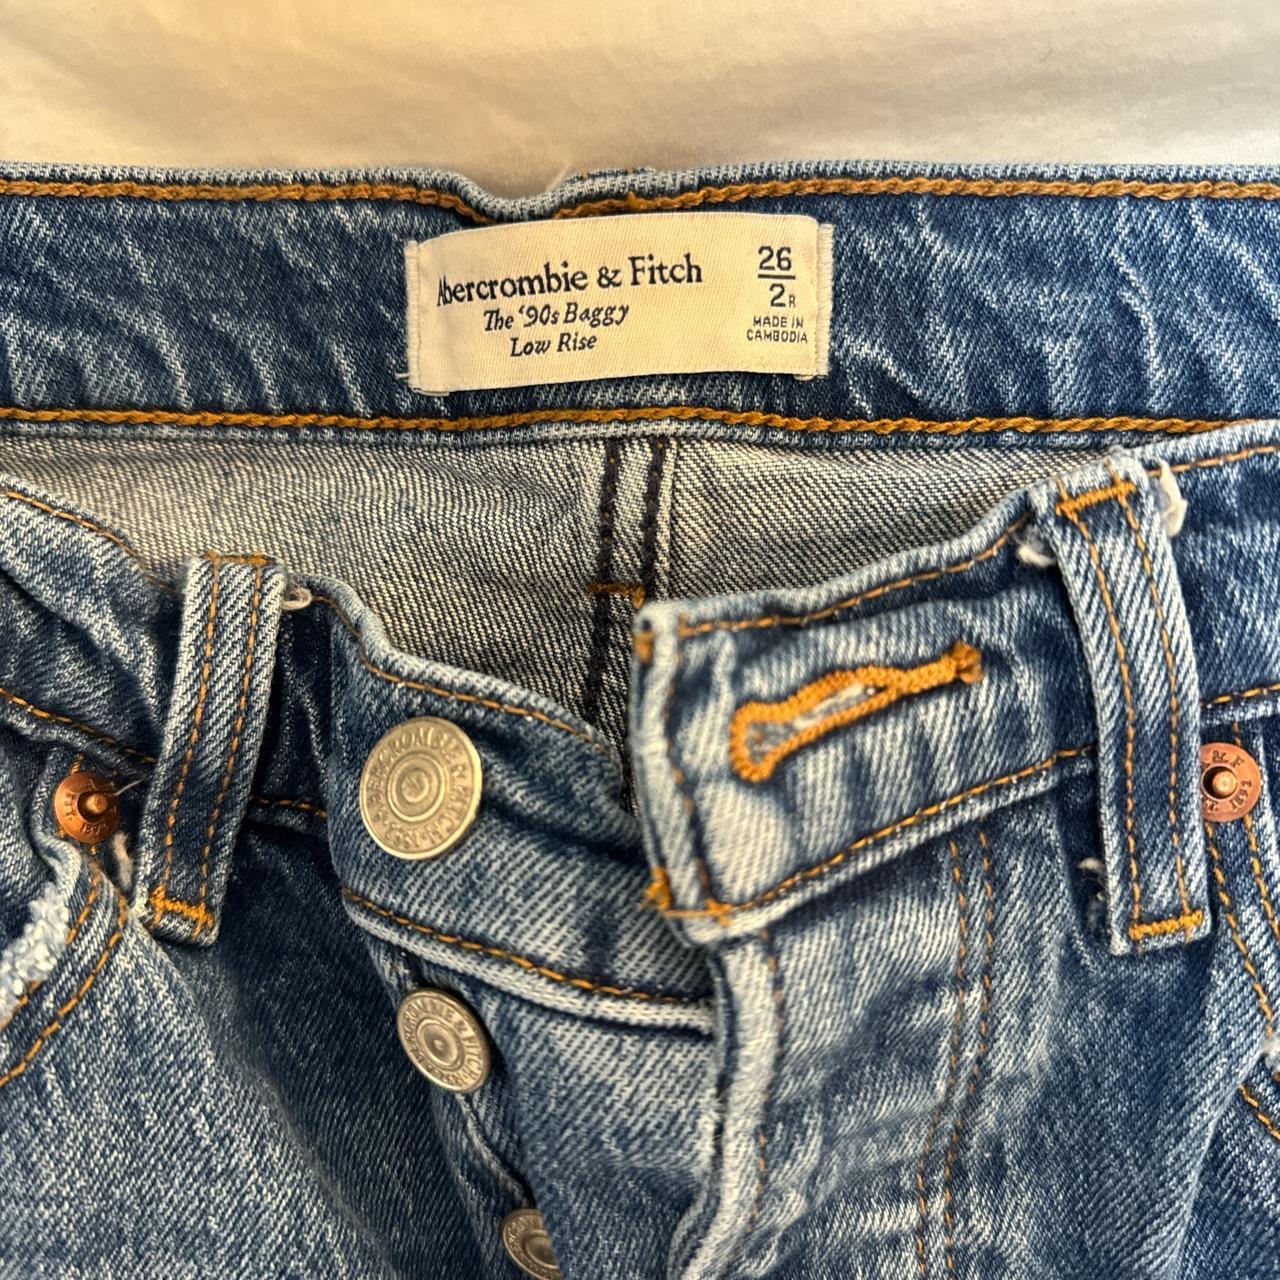 The 90’s Baggy Low Rise Jeans Reference: 5’4 ft;... - Depop